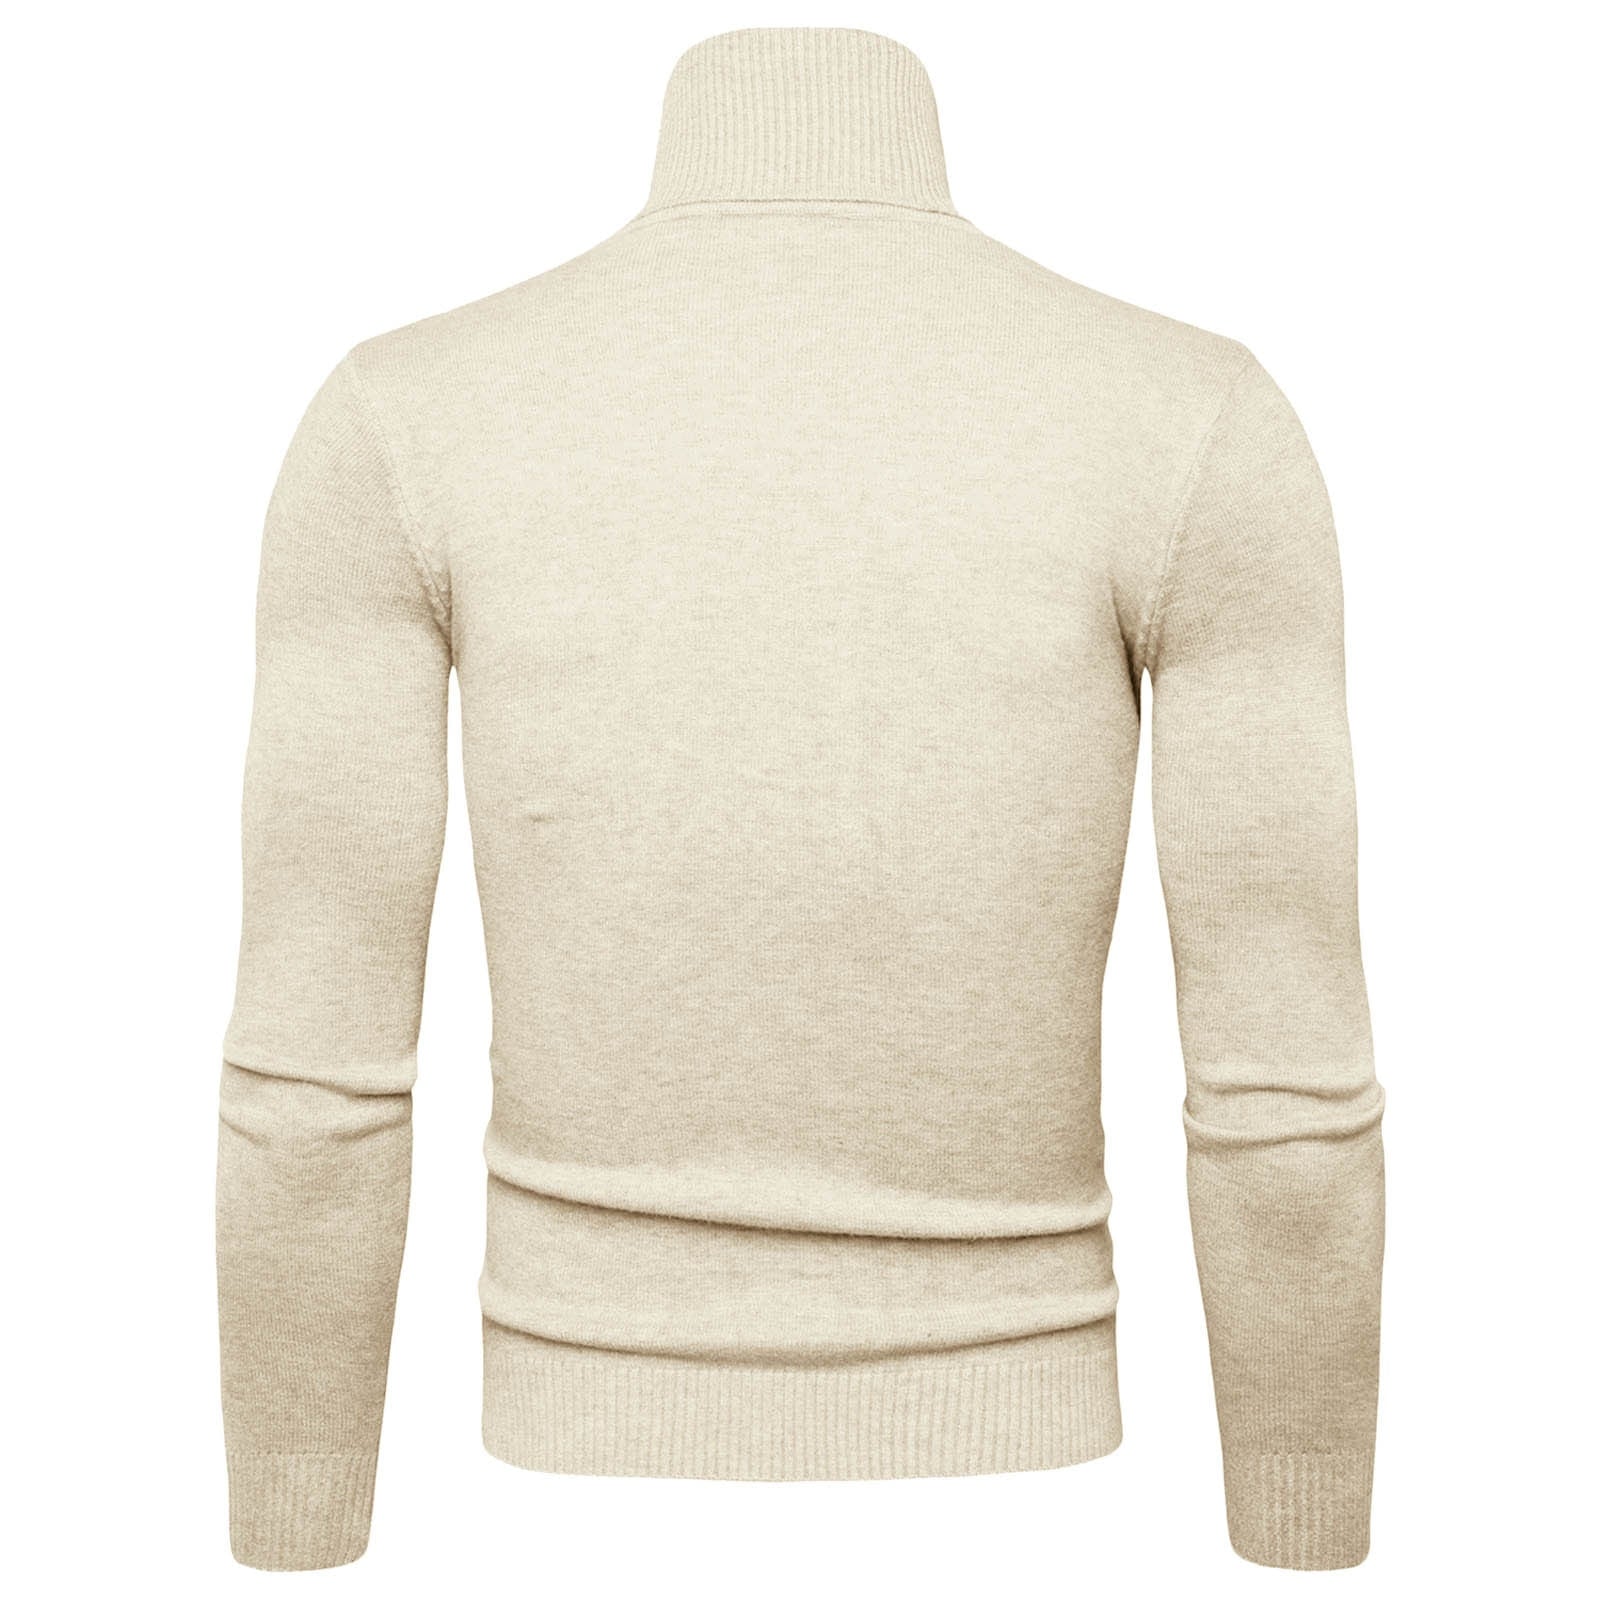 Men's Casual Slim Fit Basic Turtleneck Knitted Sweater High Collar Pullover Male Double Collar Autumn Male Tops - integrityhomedecor